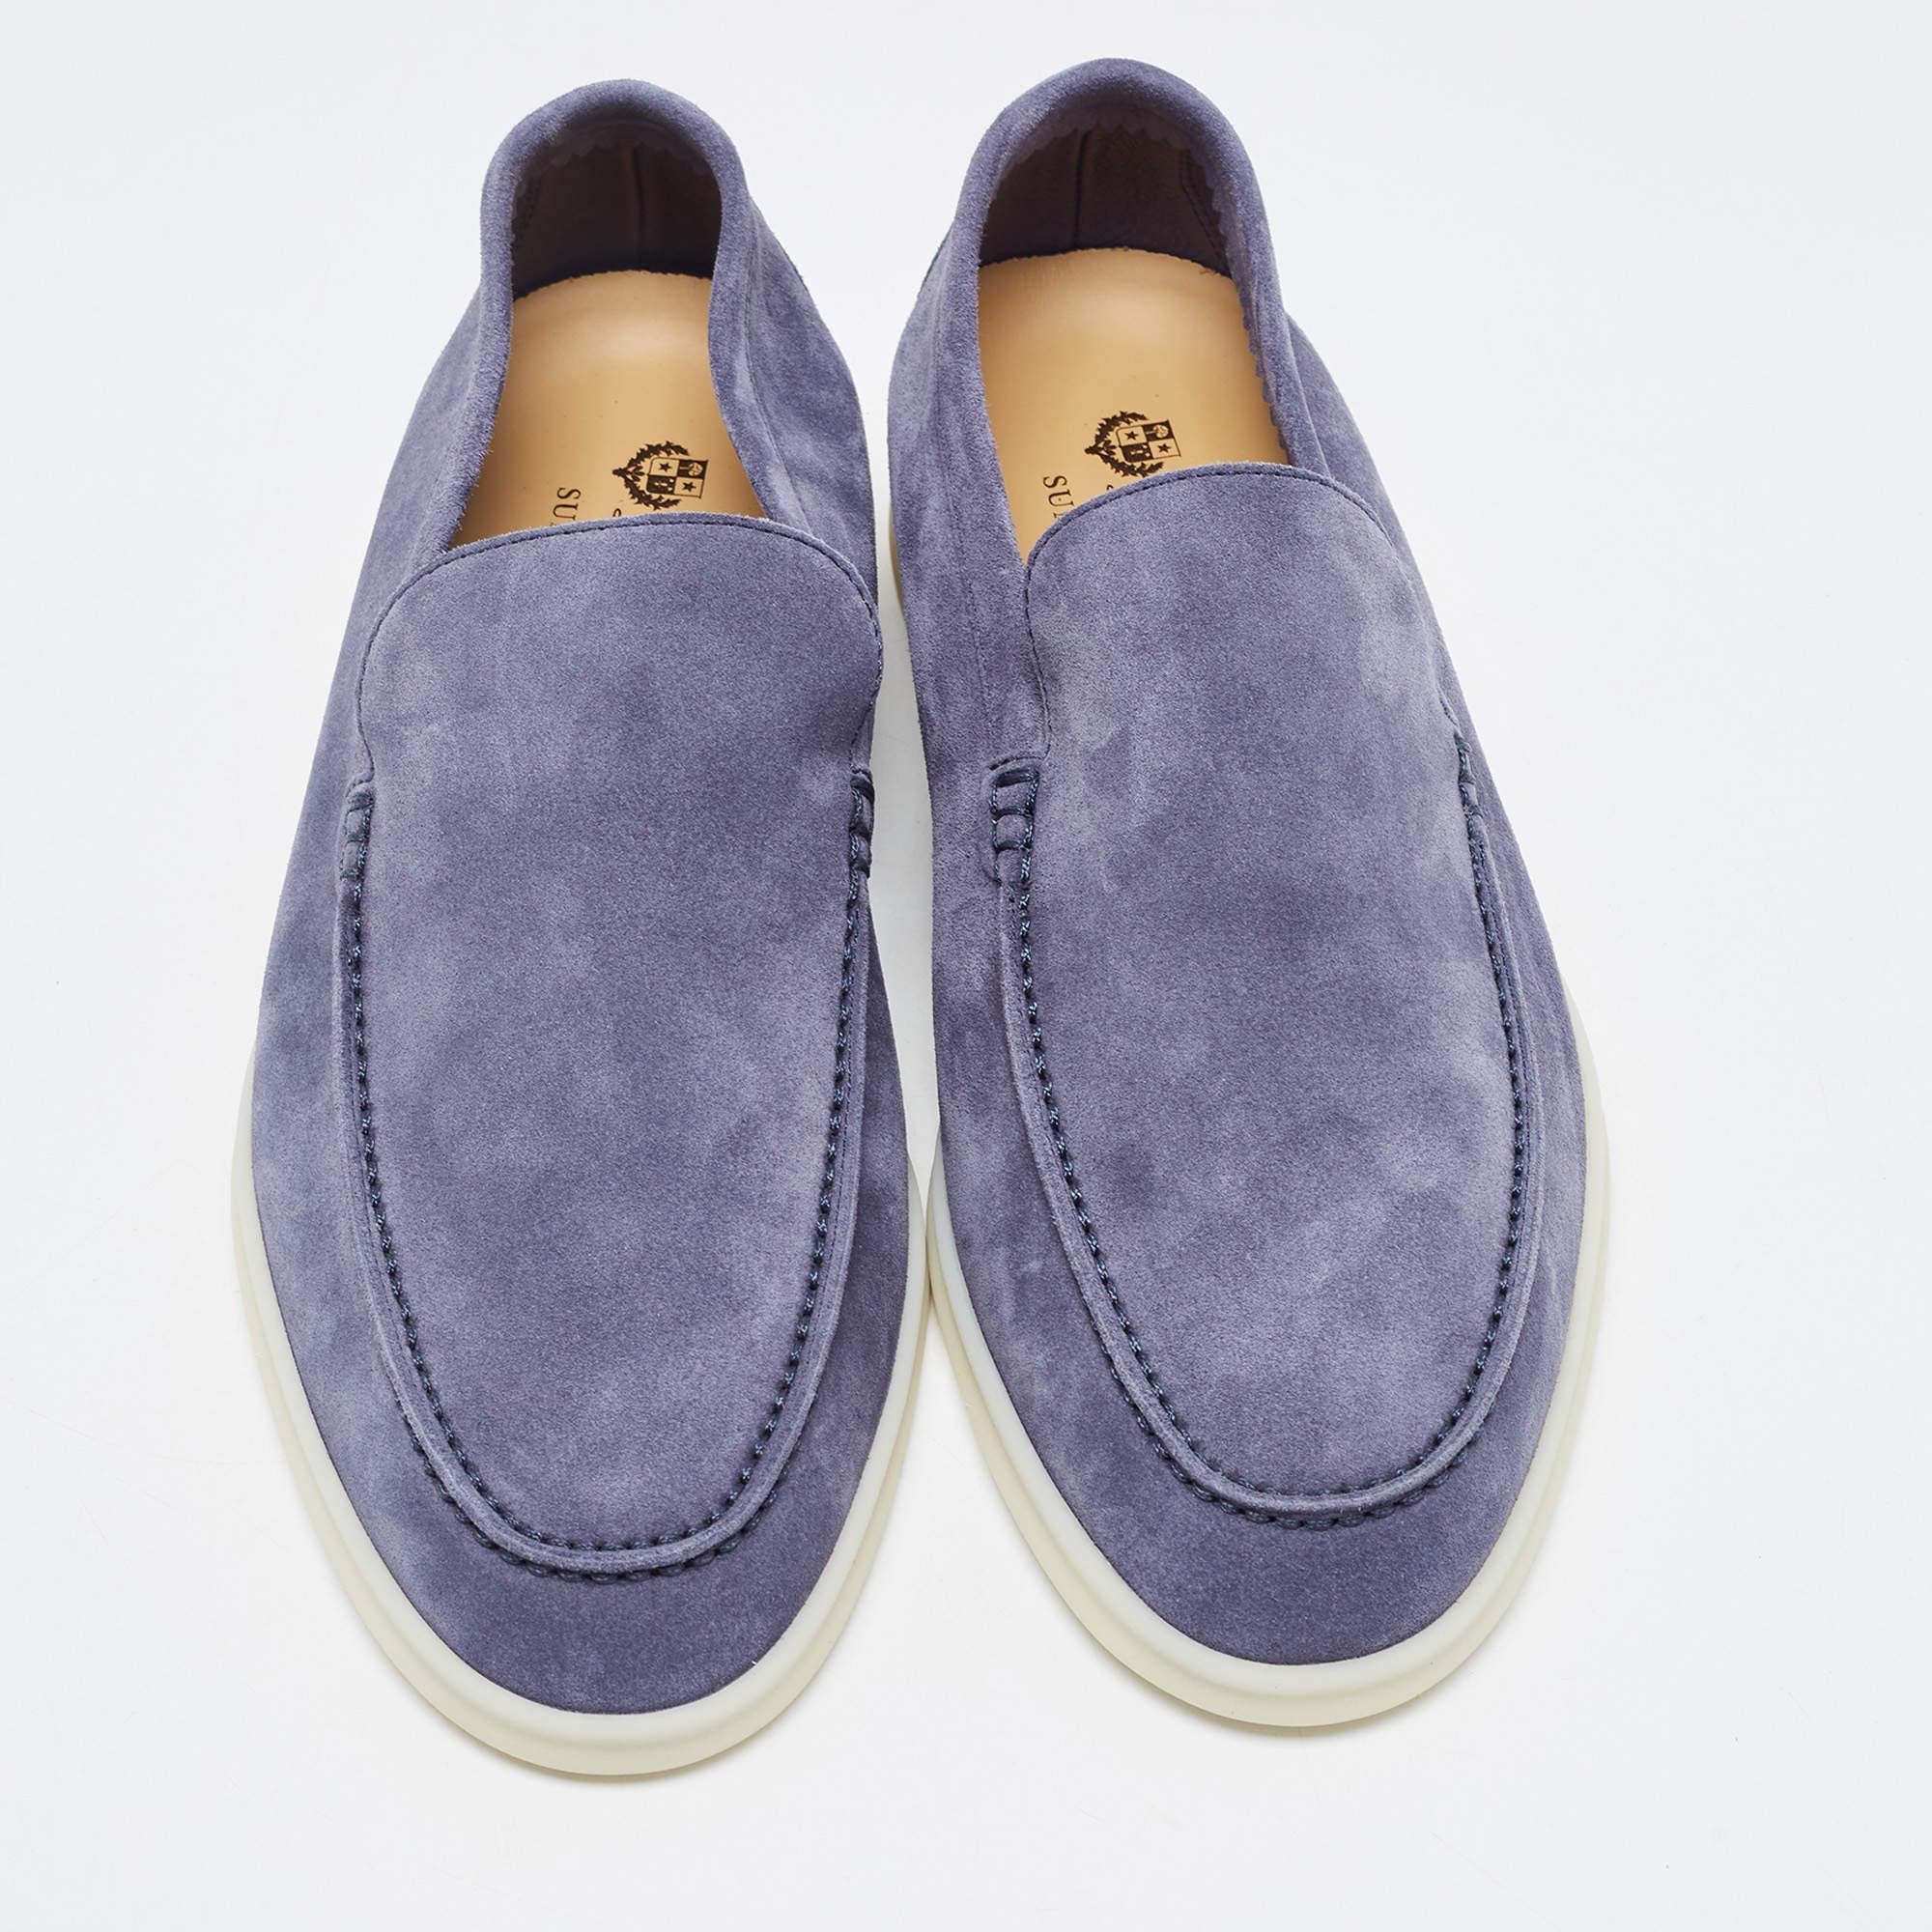 The Loro Piana Summer walk loafers are luxurious and stylish footwear perfect for the summer season. Made from premium suede, these loafers offer a comfortable and lightweight feel. Adorned with charming details, they exude elegance and